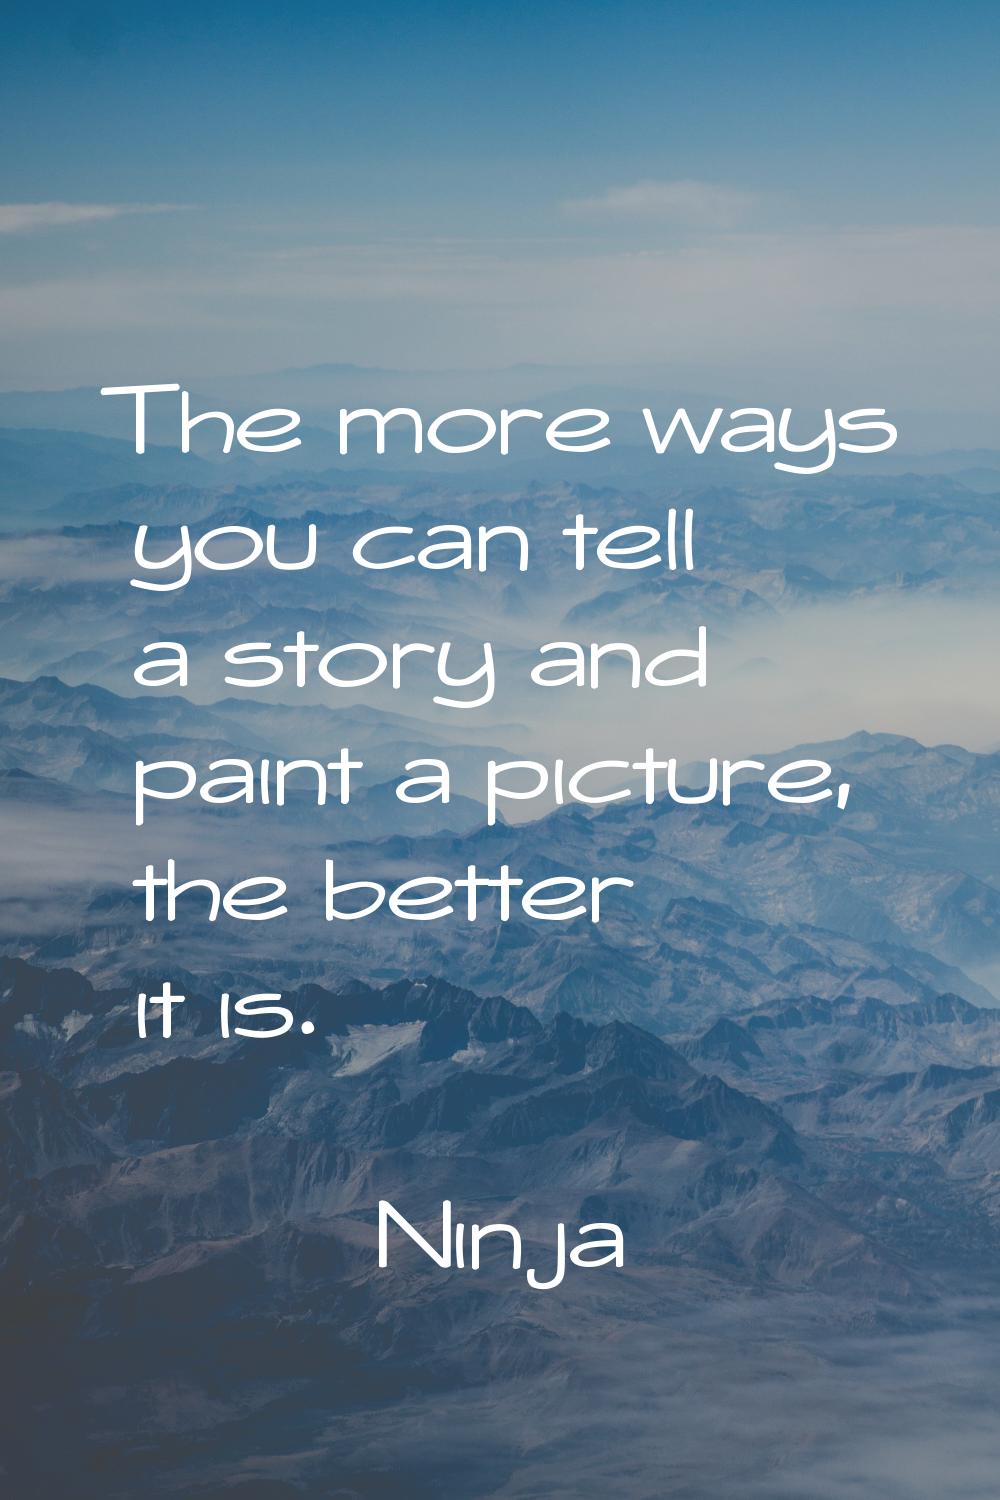 The more ways you can tell a story and paint a picture, the better it is.